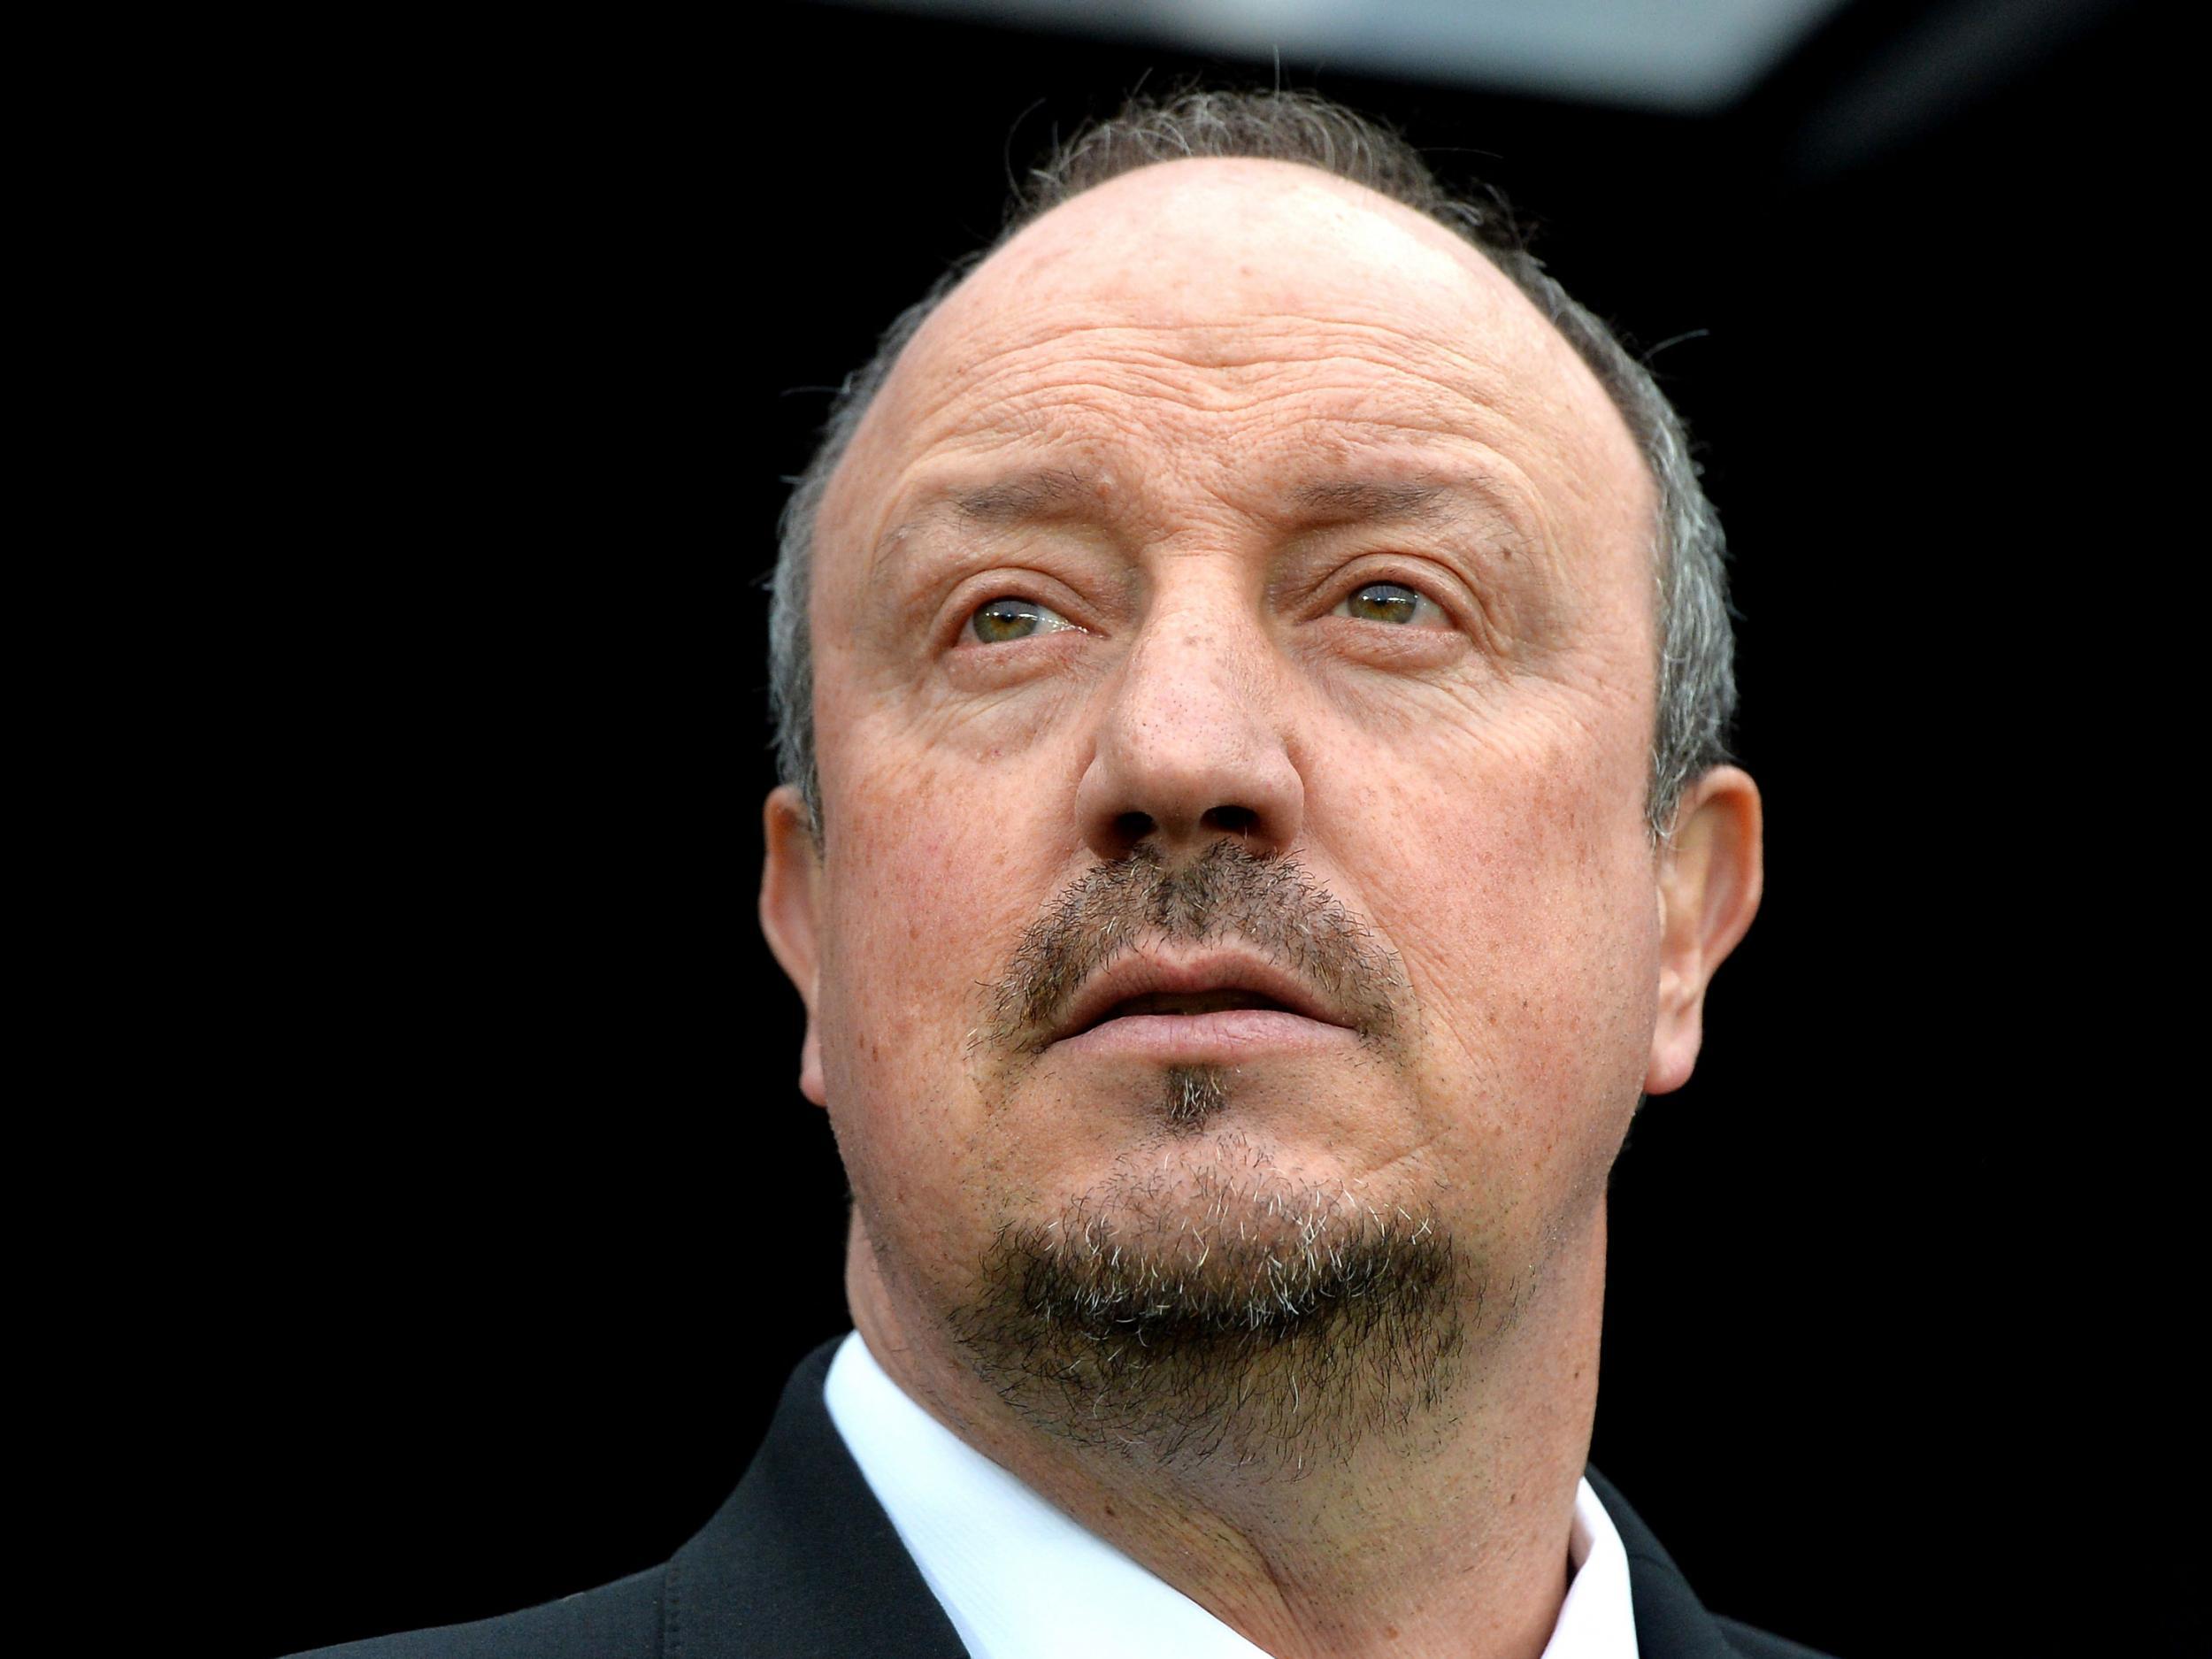 Rafael Benitez is looking ahead despite the uncertainty surrounding his future at the club